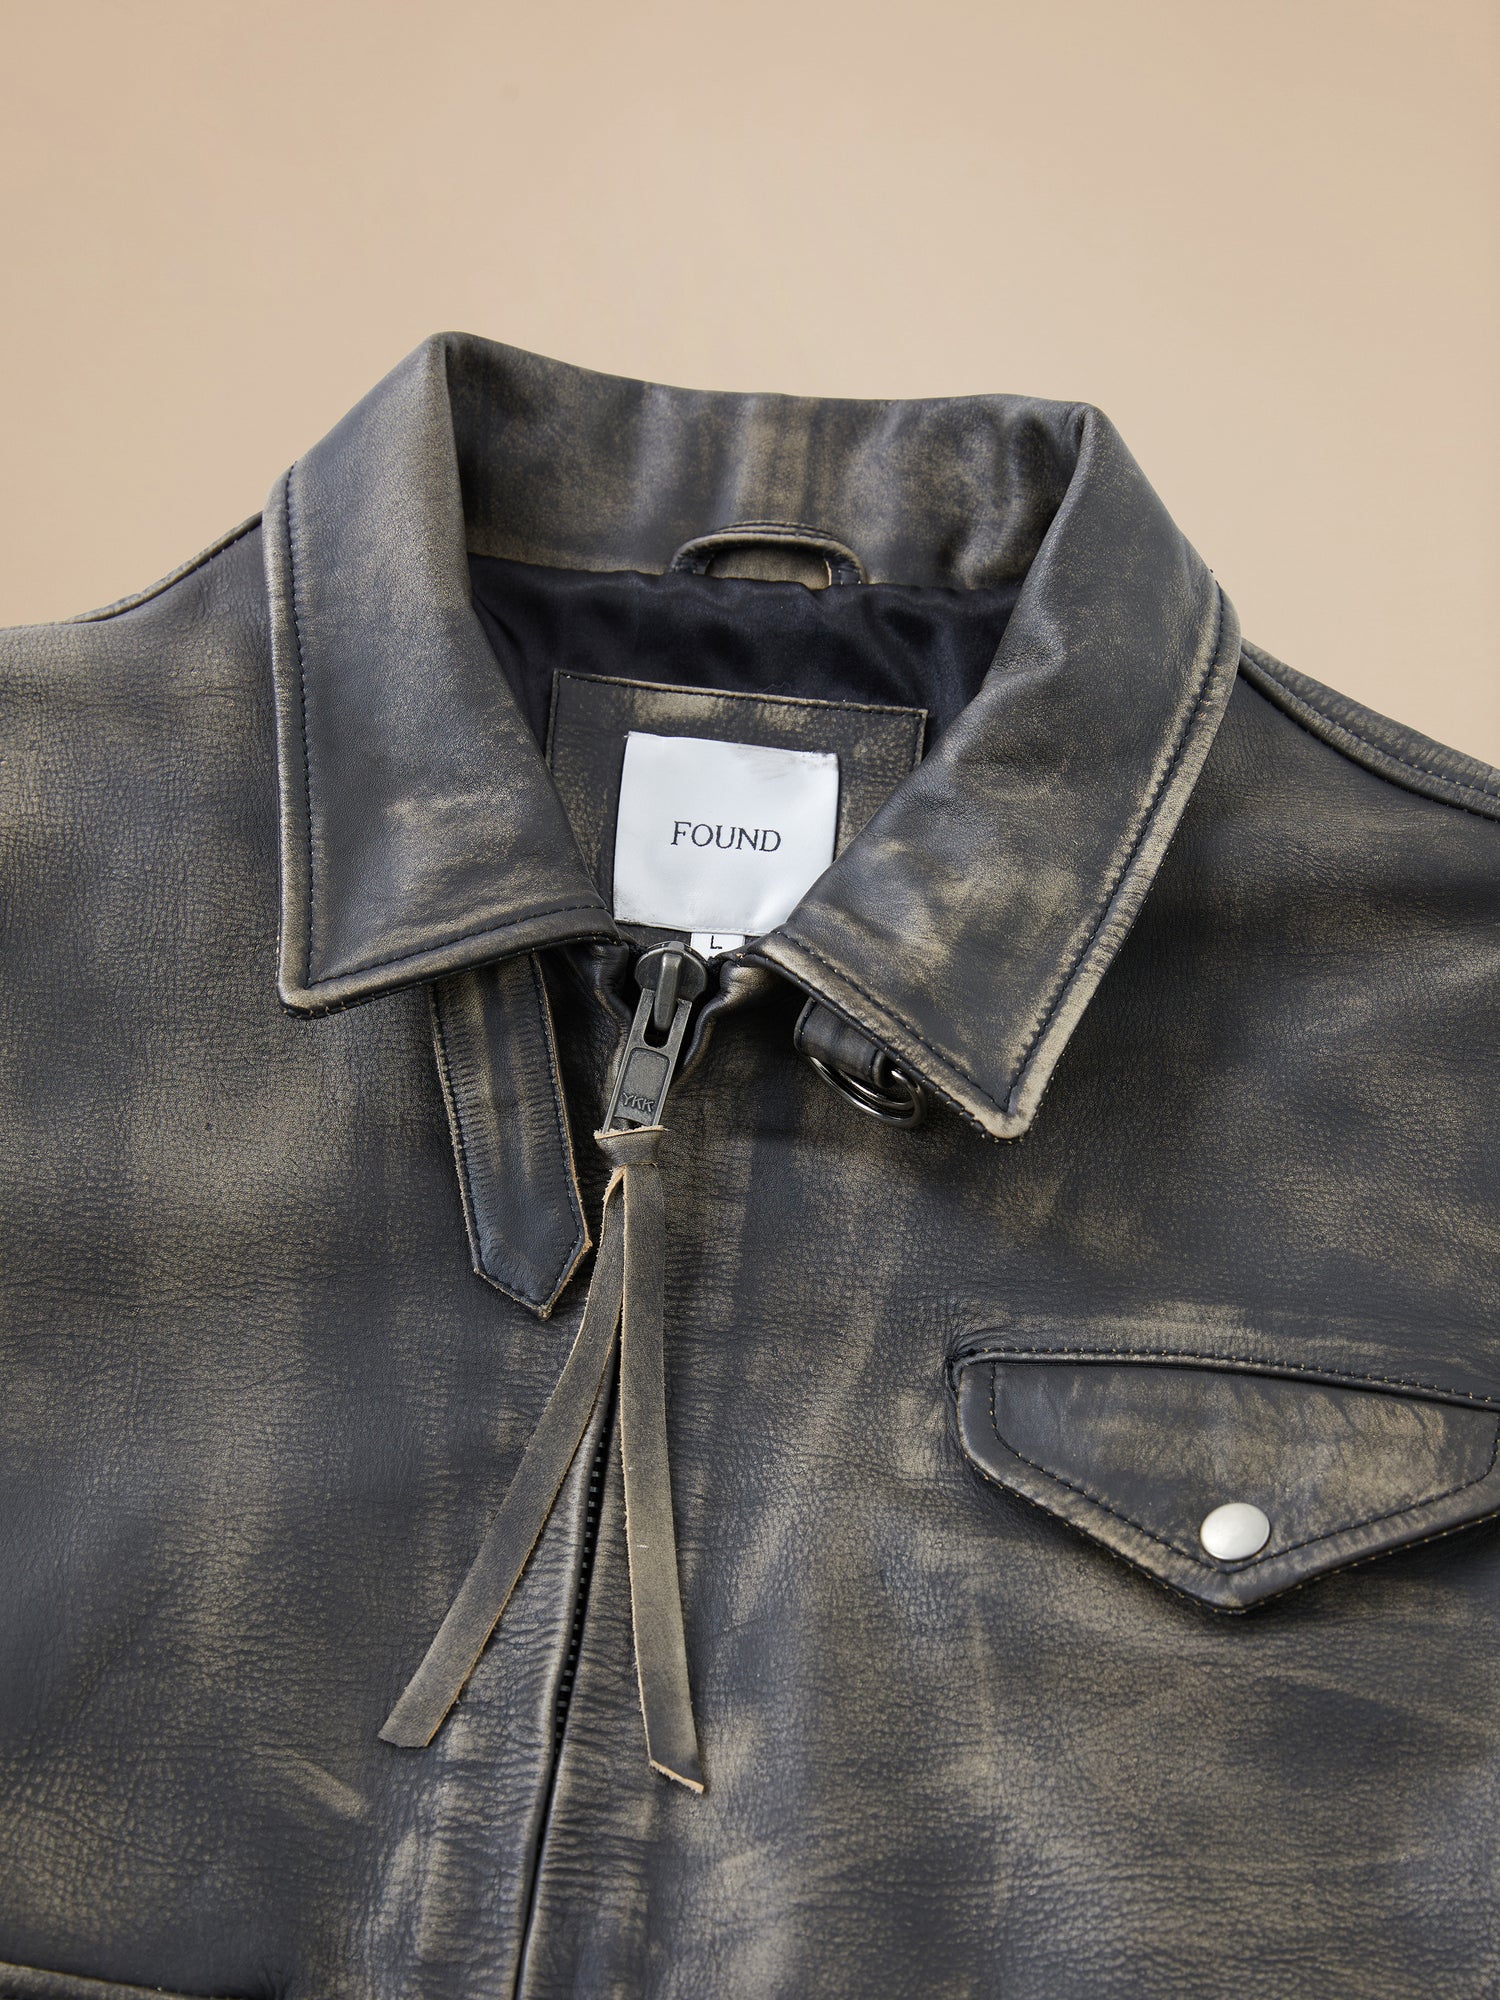 A close up of a Found Distressed Leather Pocket Jacket.